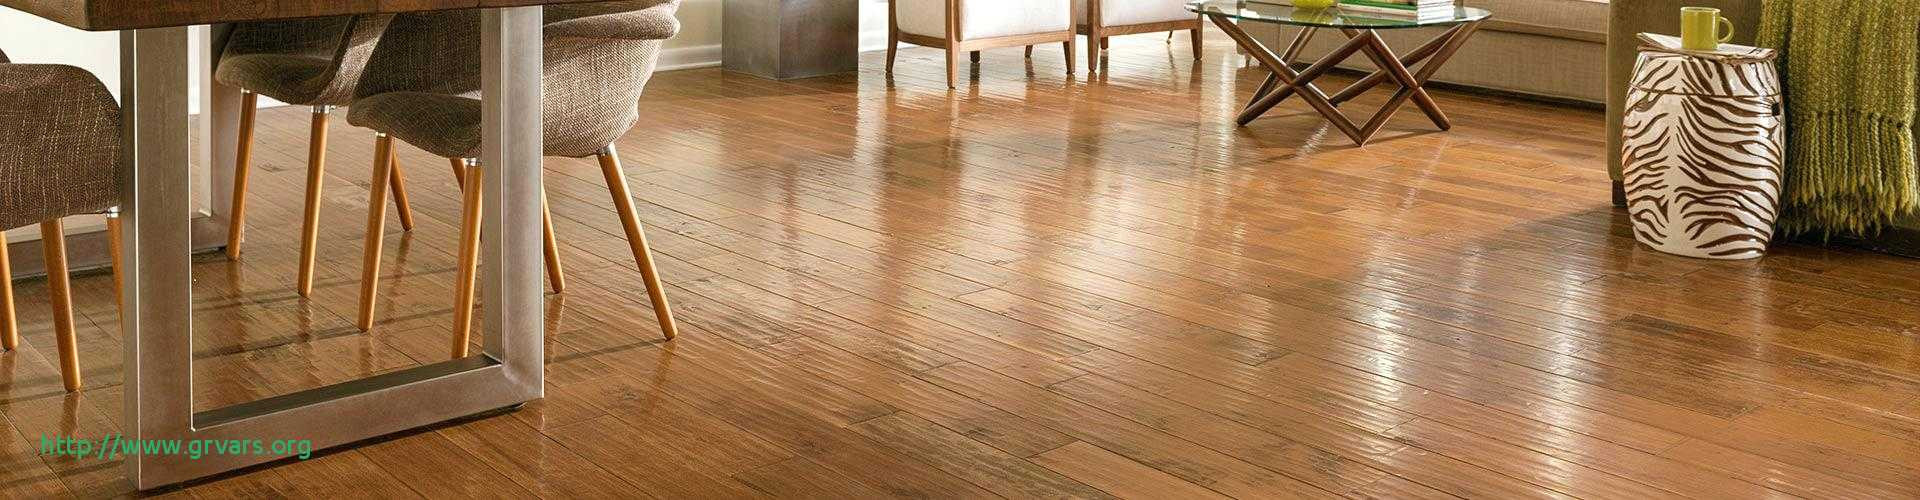 13 attractive Acacia Hardwood Flooring Pros and Cons 2024 free download acacia hardwood flooring pros and cons of 23 ac289lagant pros and cons of laminate flooring versus hardwood throughout pros and cons of laminate flooring versus hardwood luxe od grain tile b